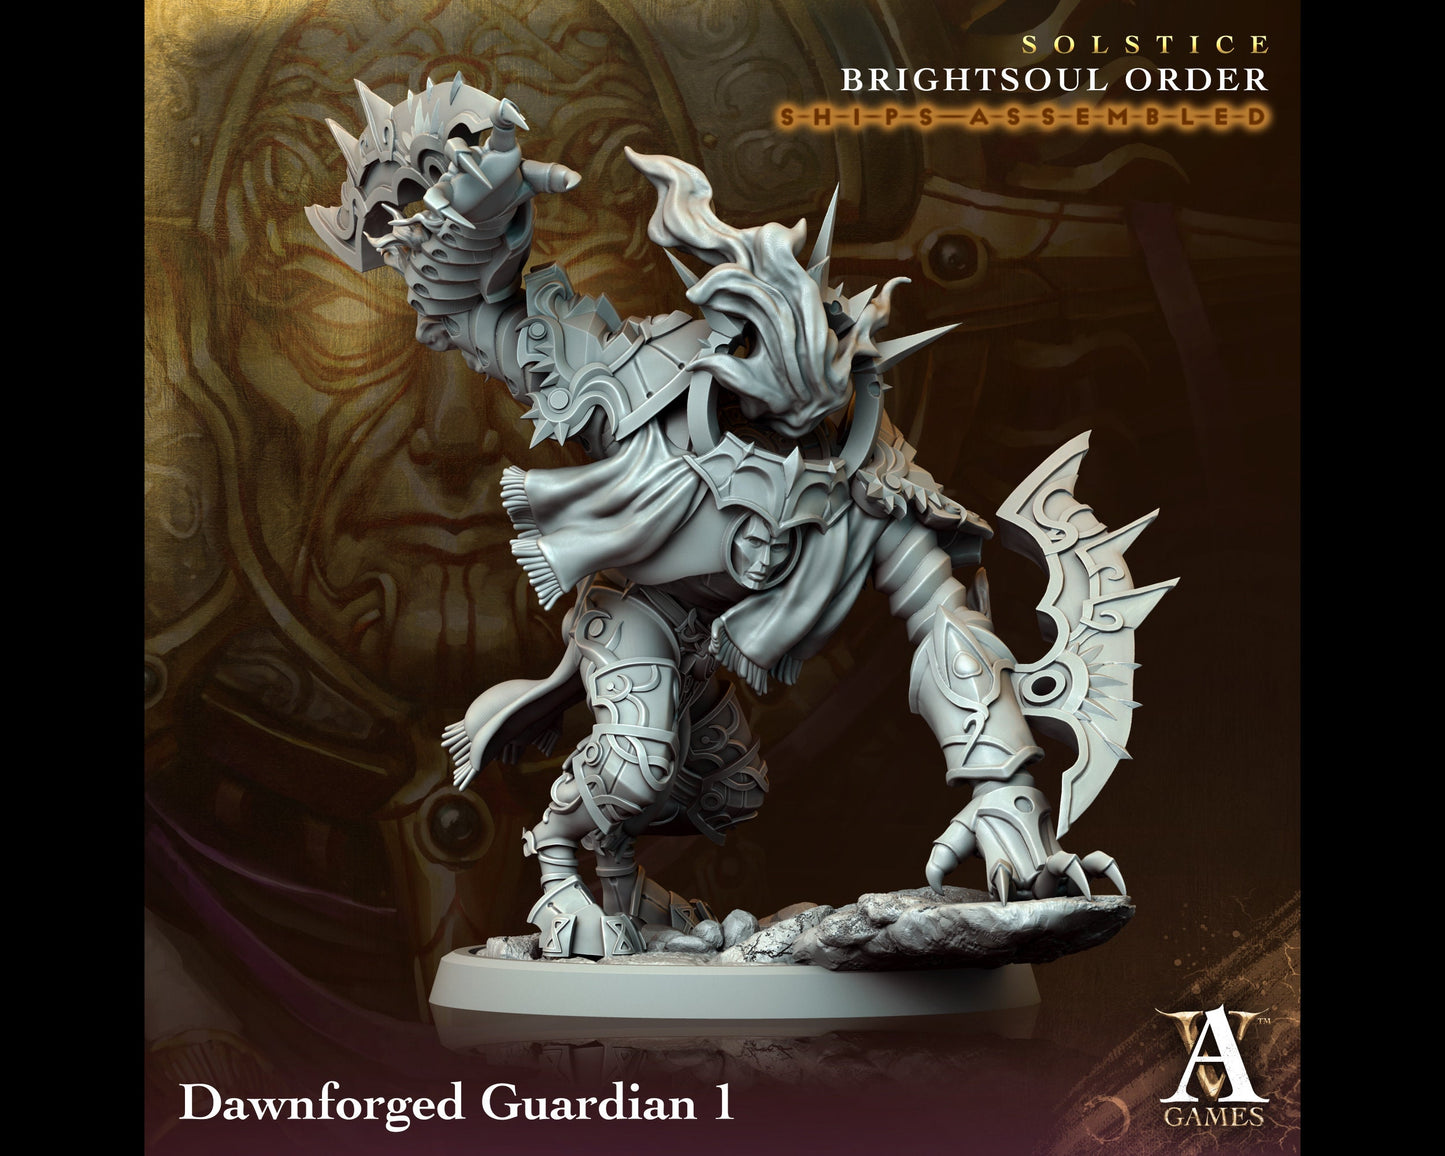 Dawnforged Guardian 1 - Brightsoul Order - Highly Detailed Resin 8k 3D Printed Miniature